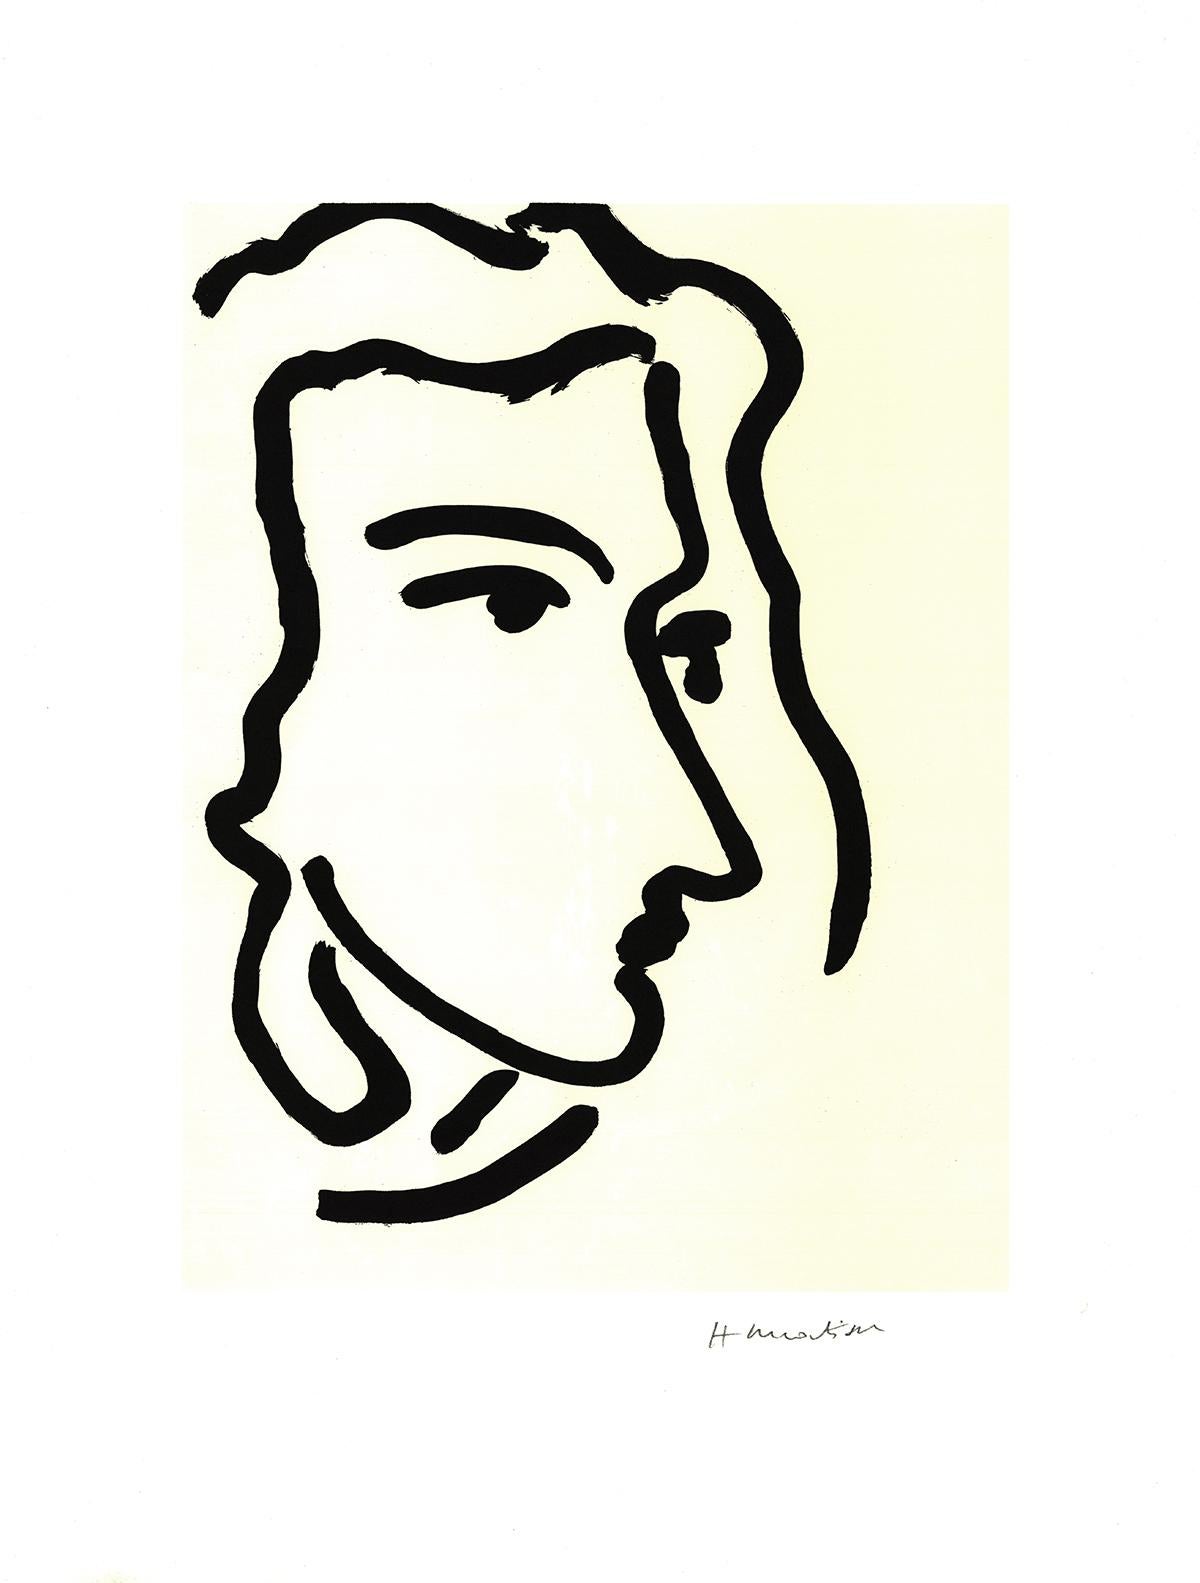 Nadia regardant a droite was made in 1950 and beautifully reproduced by Maeght Editeur with the permission of the Henri Matisse Estate in 1988. The lithograph is embellished with a facsimile signature of the artist on the bottom right hand corner of